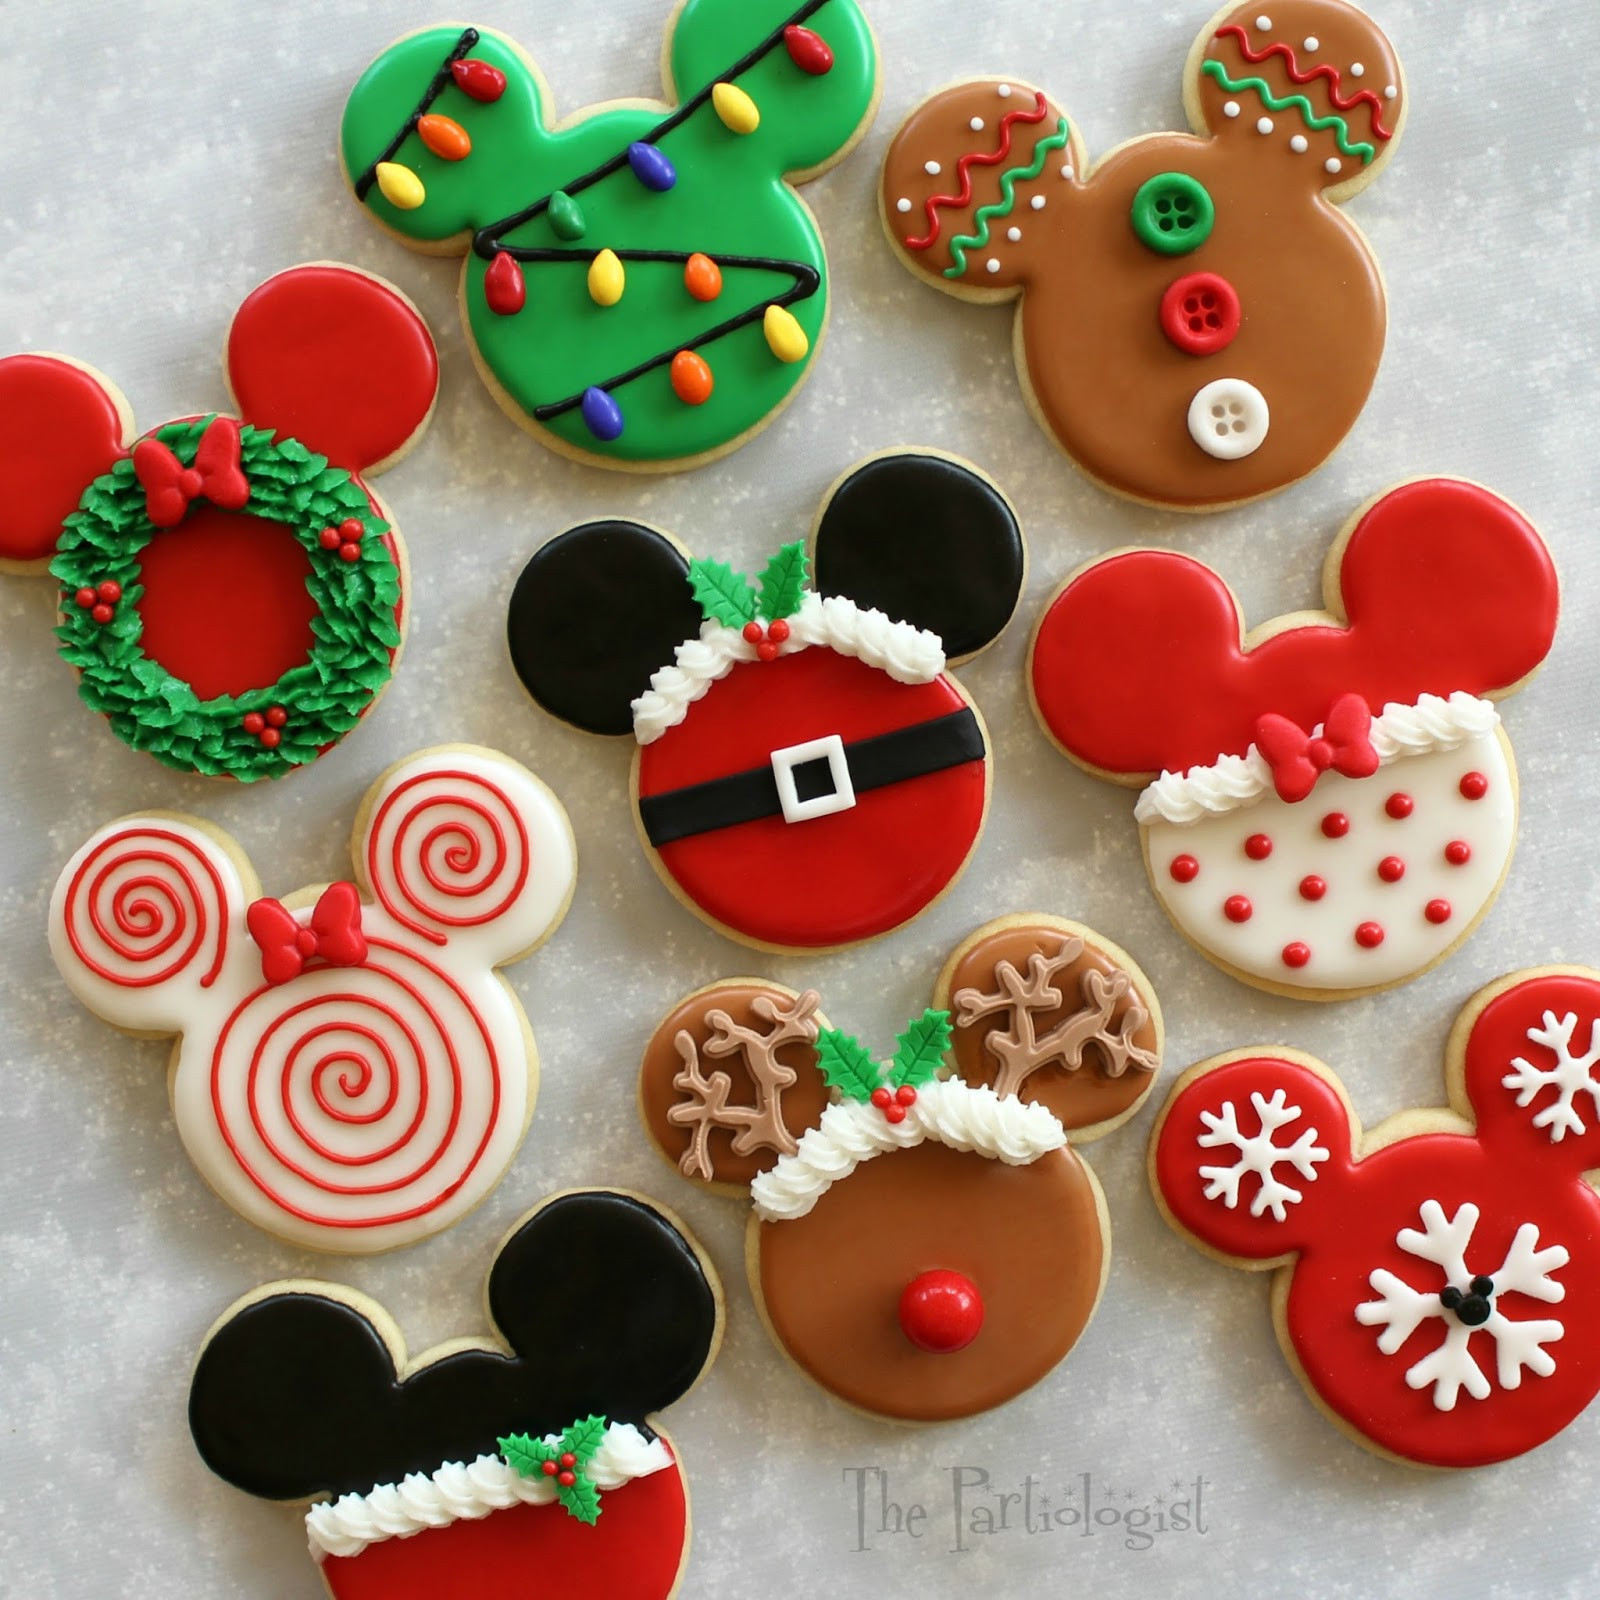 Christmas Cookies Ideas
 The Partiologist Disney Themed Christmas Cookies